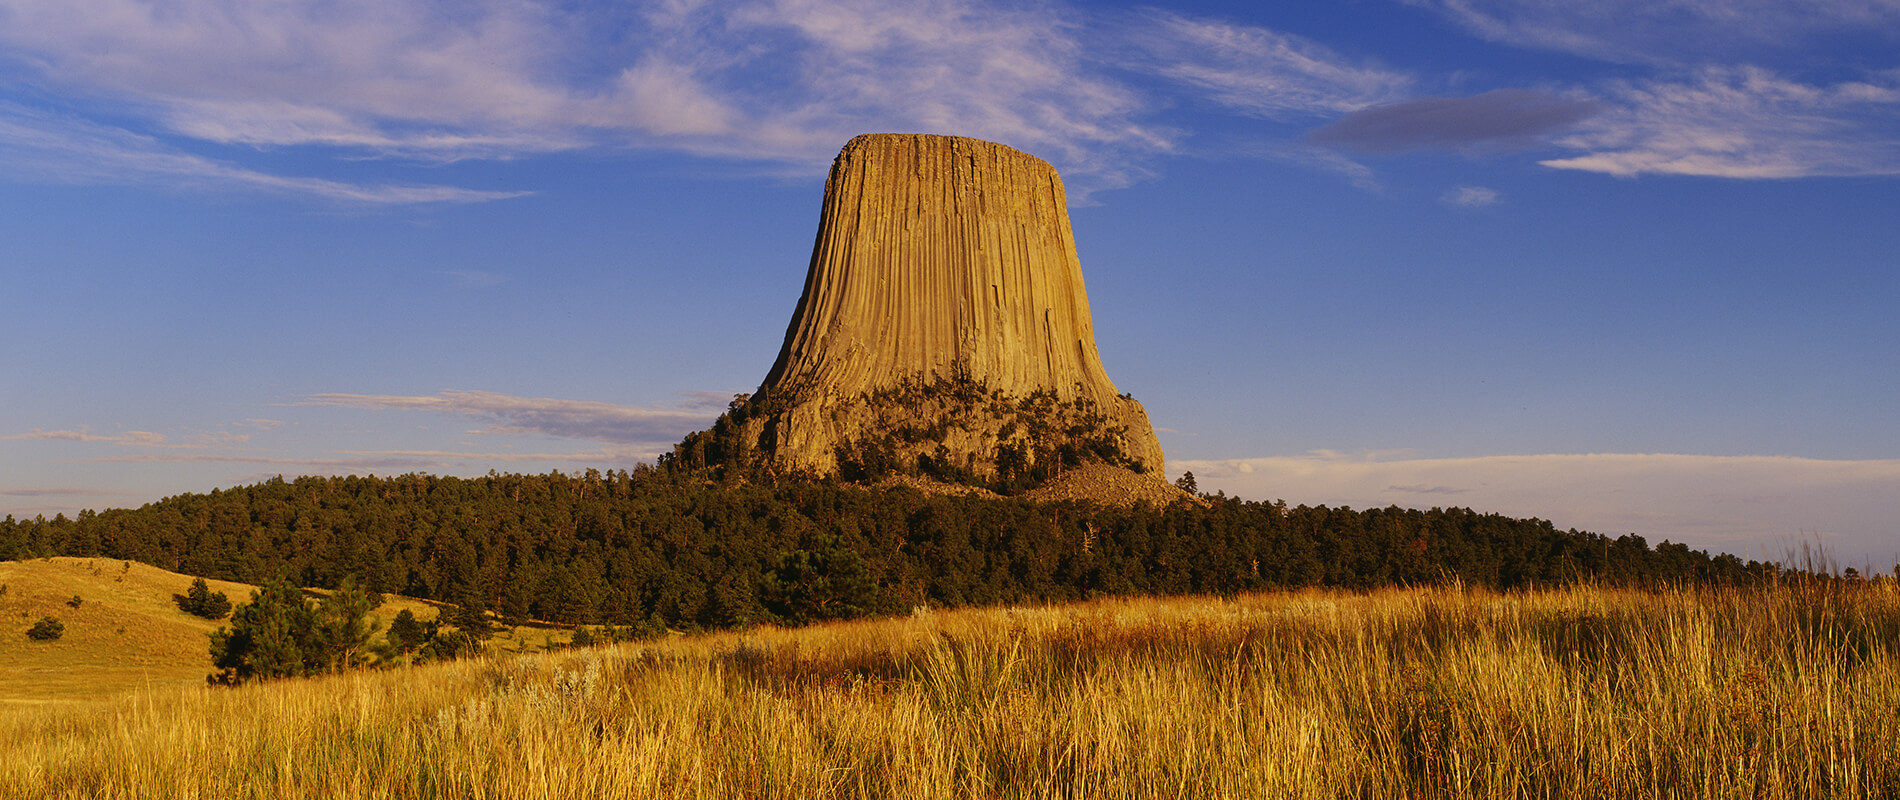 Devils Tower, the legendary rock of Wyoming